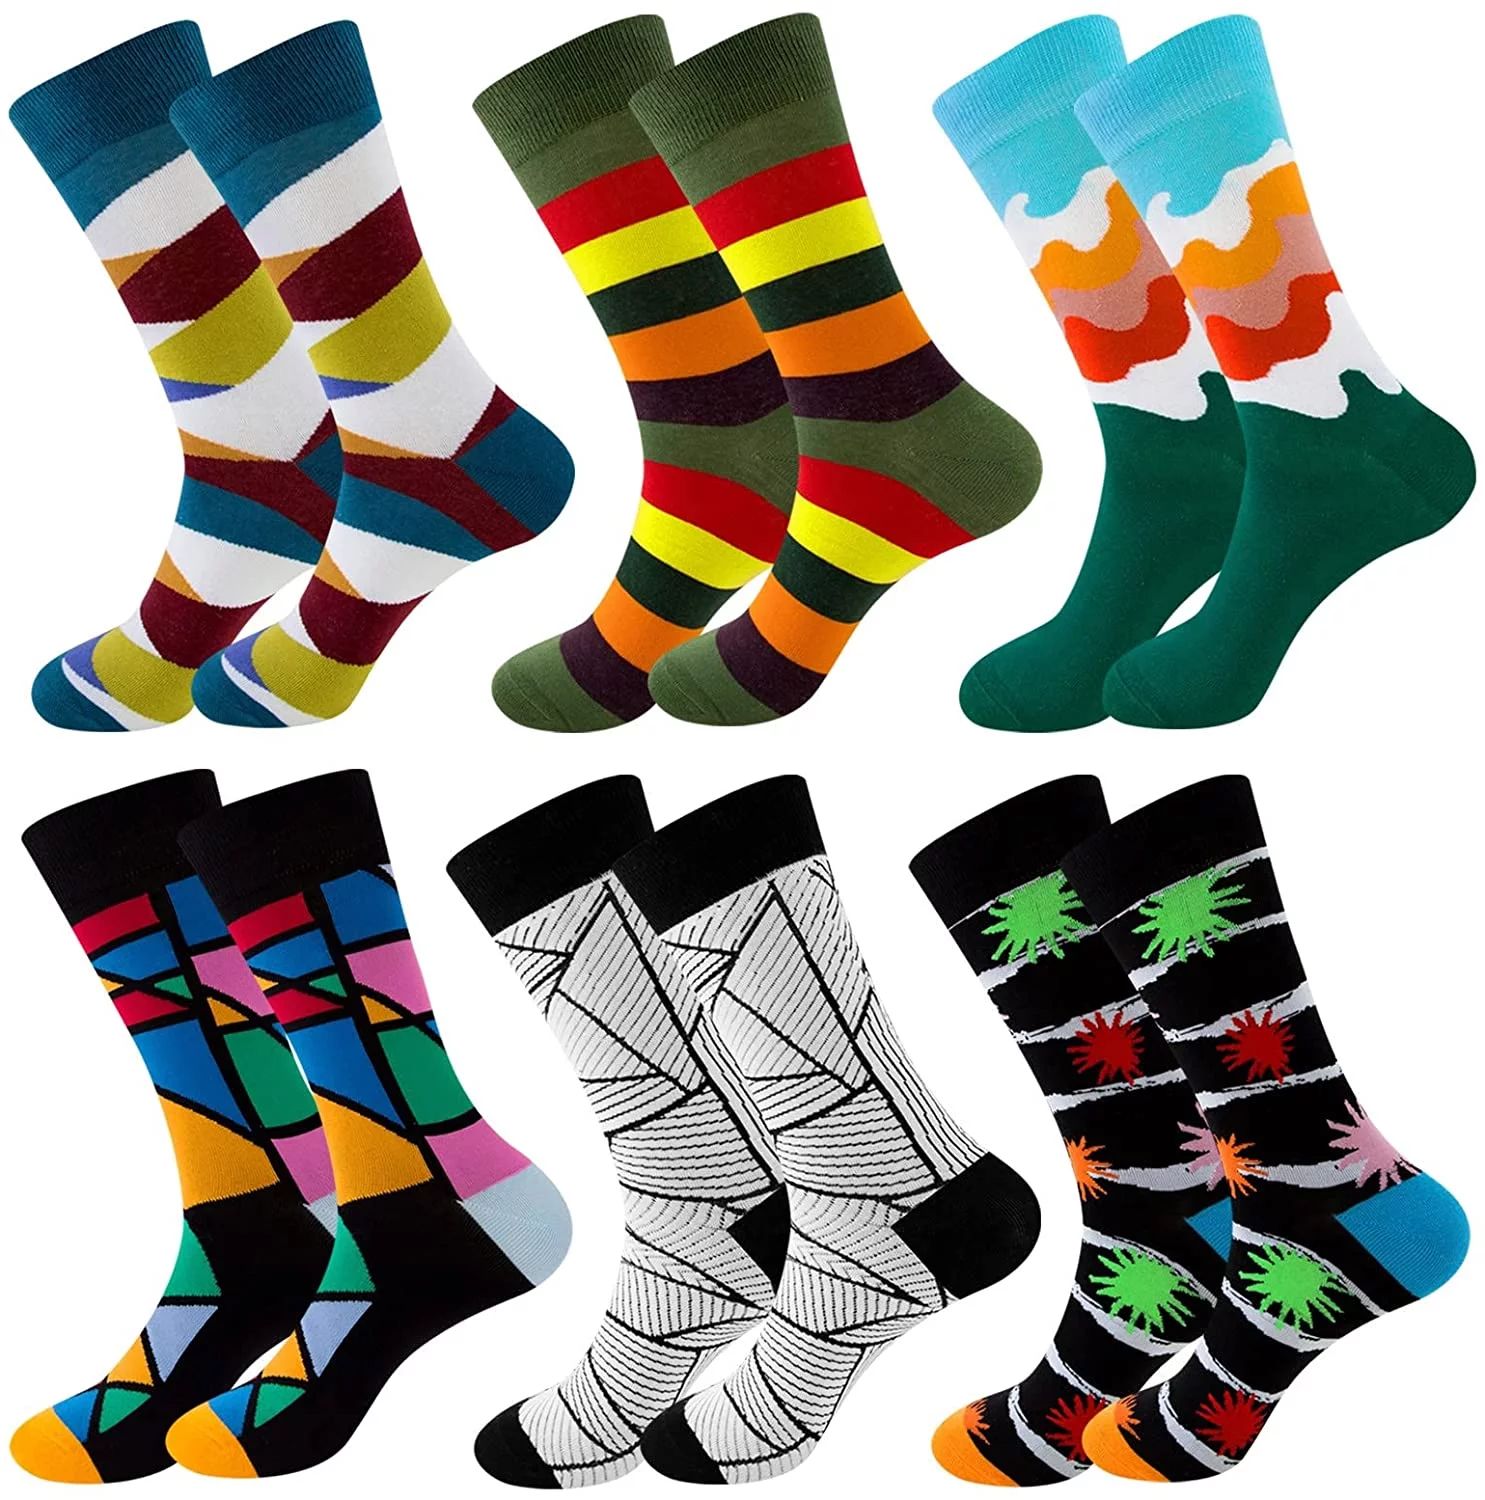 6 Pairs Colorful Novelty Crew Socks Soft Cotton Funny Patterned Casual Crazy Dress Socks for Men,... | Walmart (US)